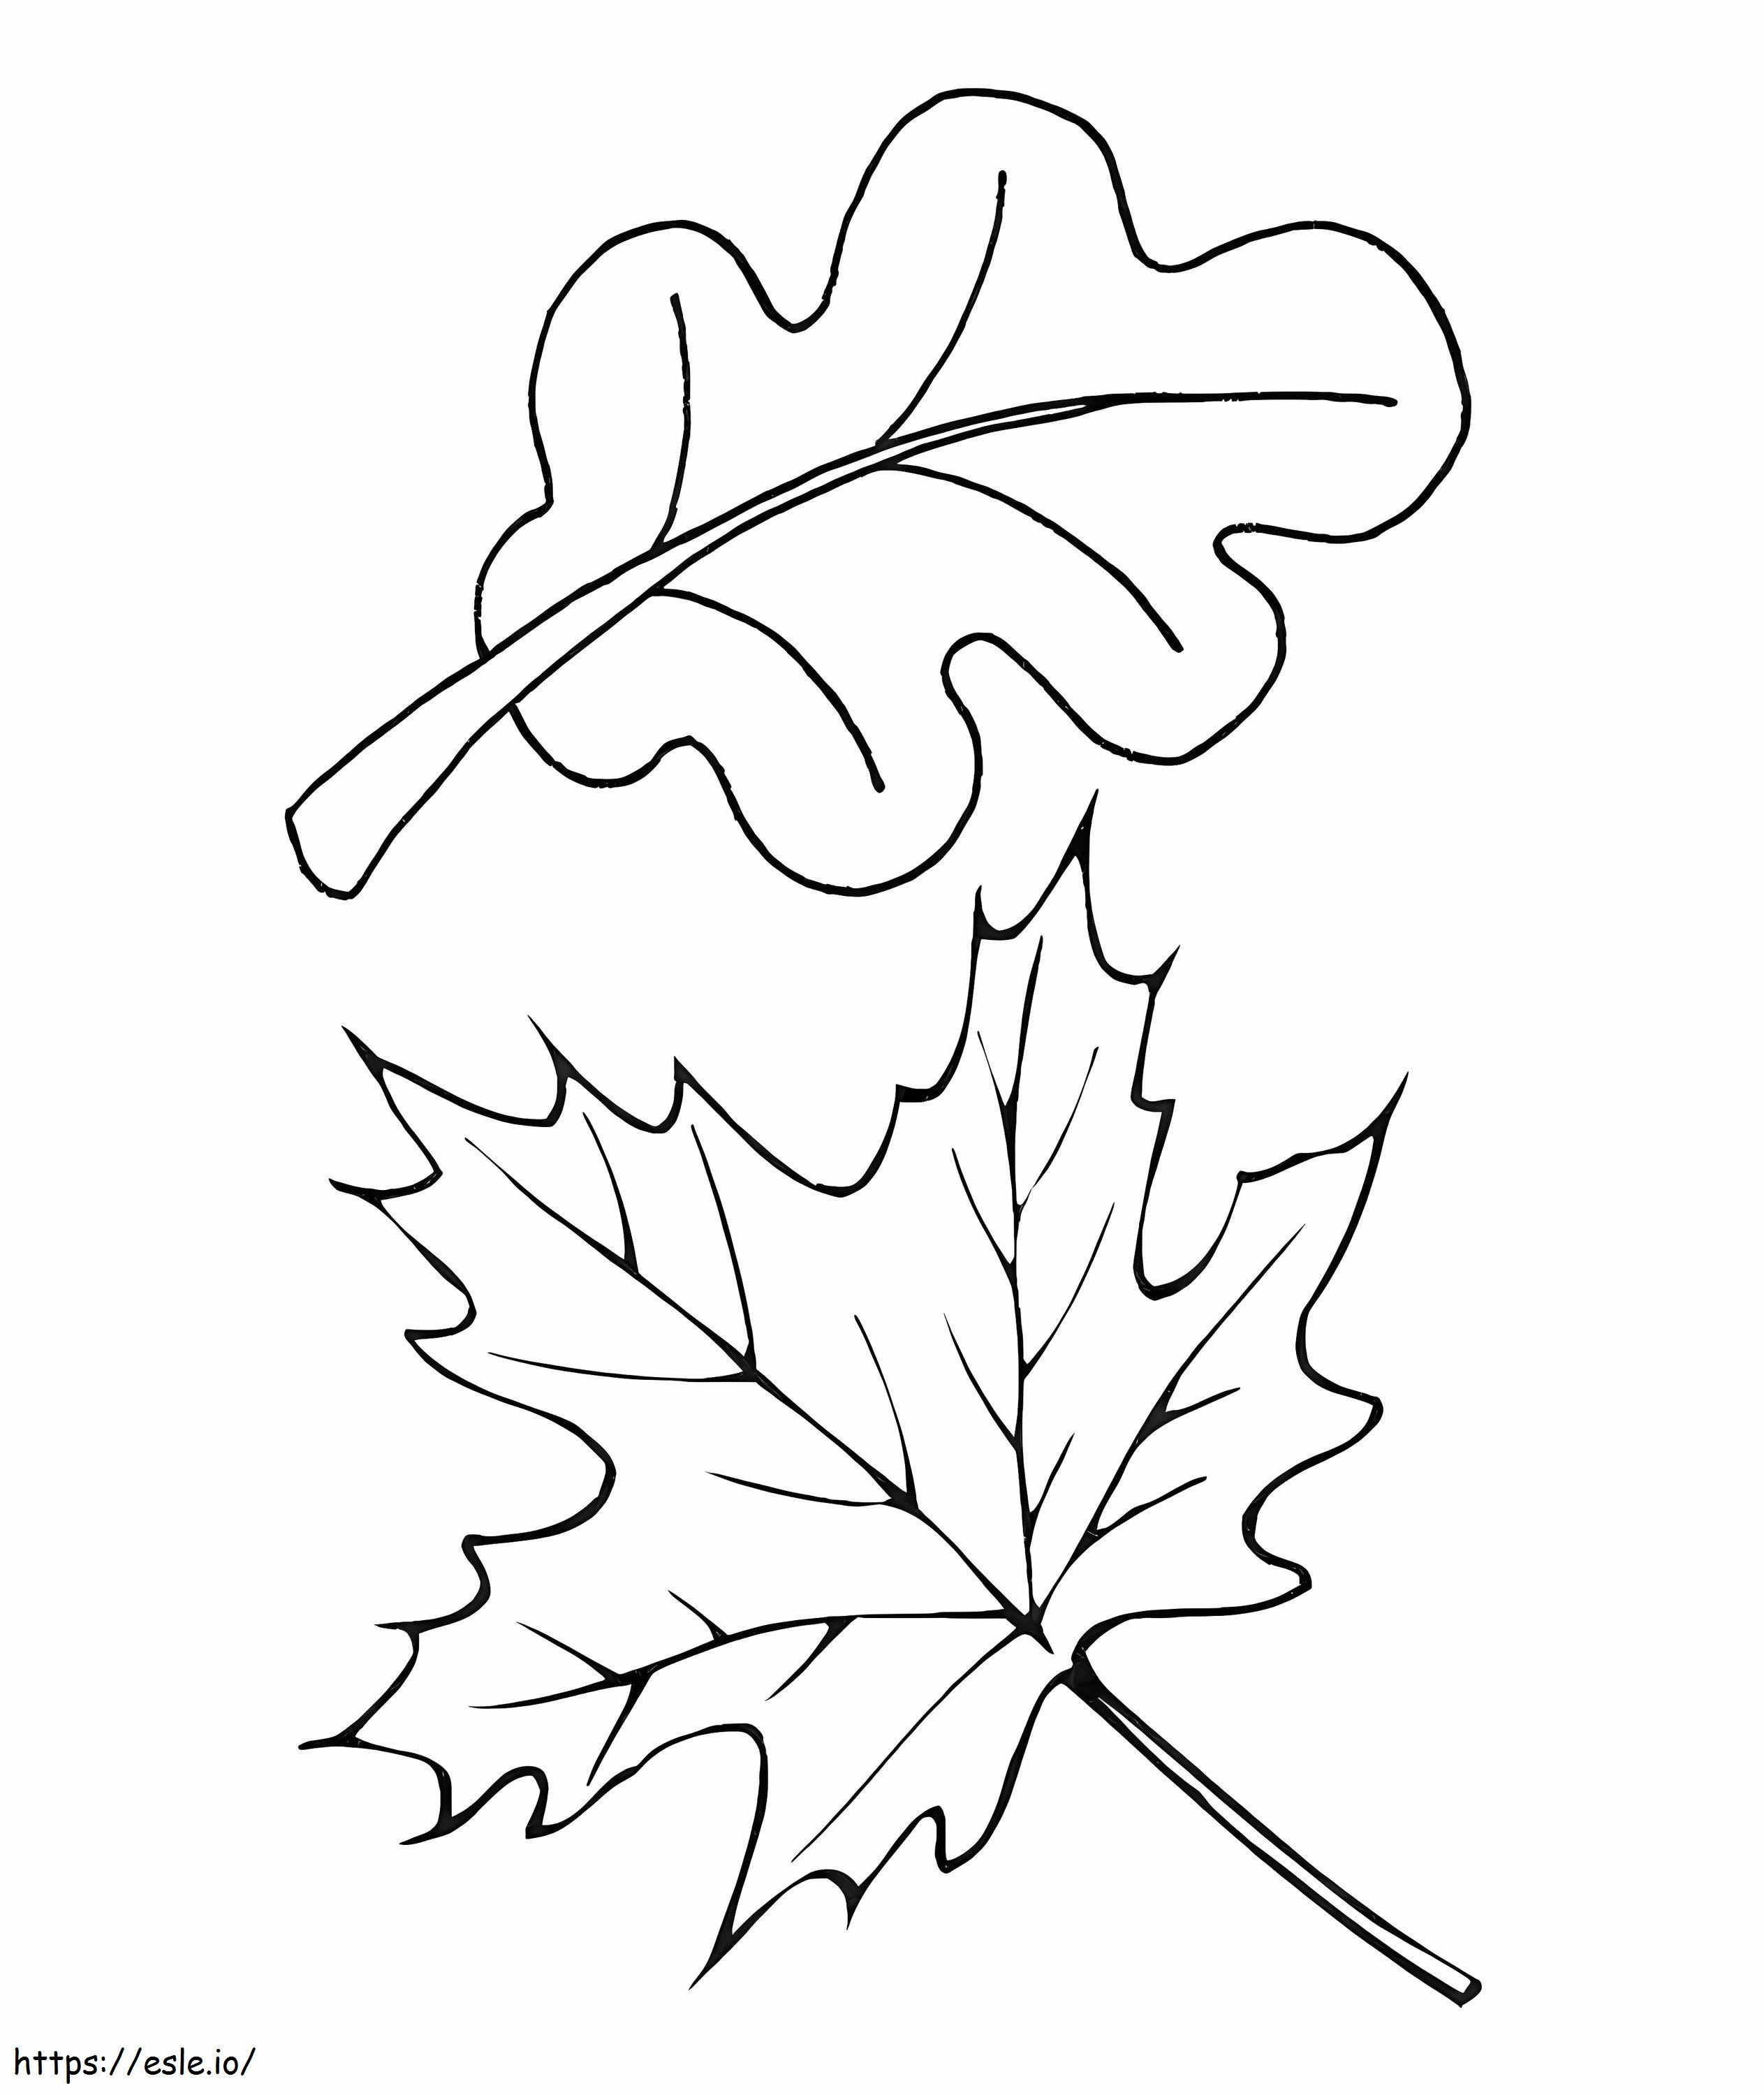 Autumn Of Two Leaves coloring page